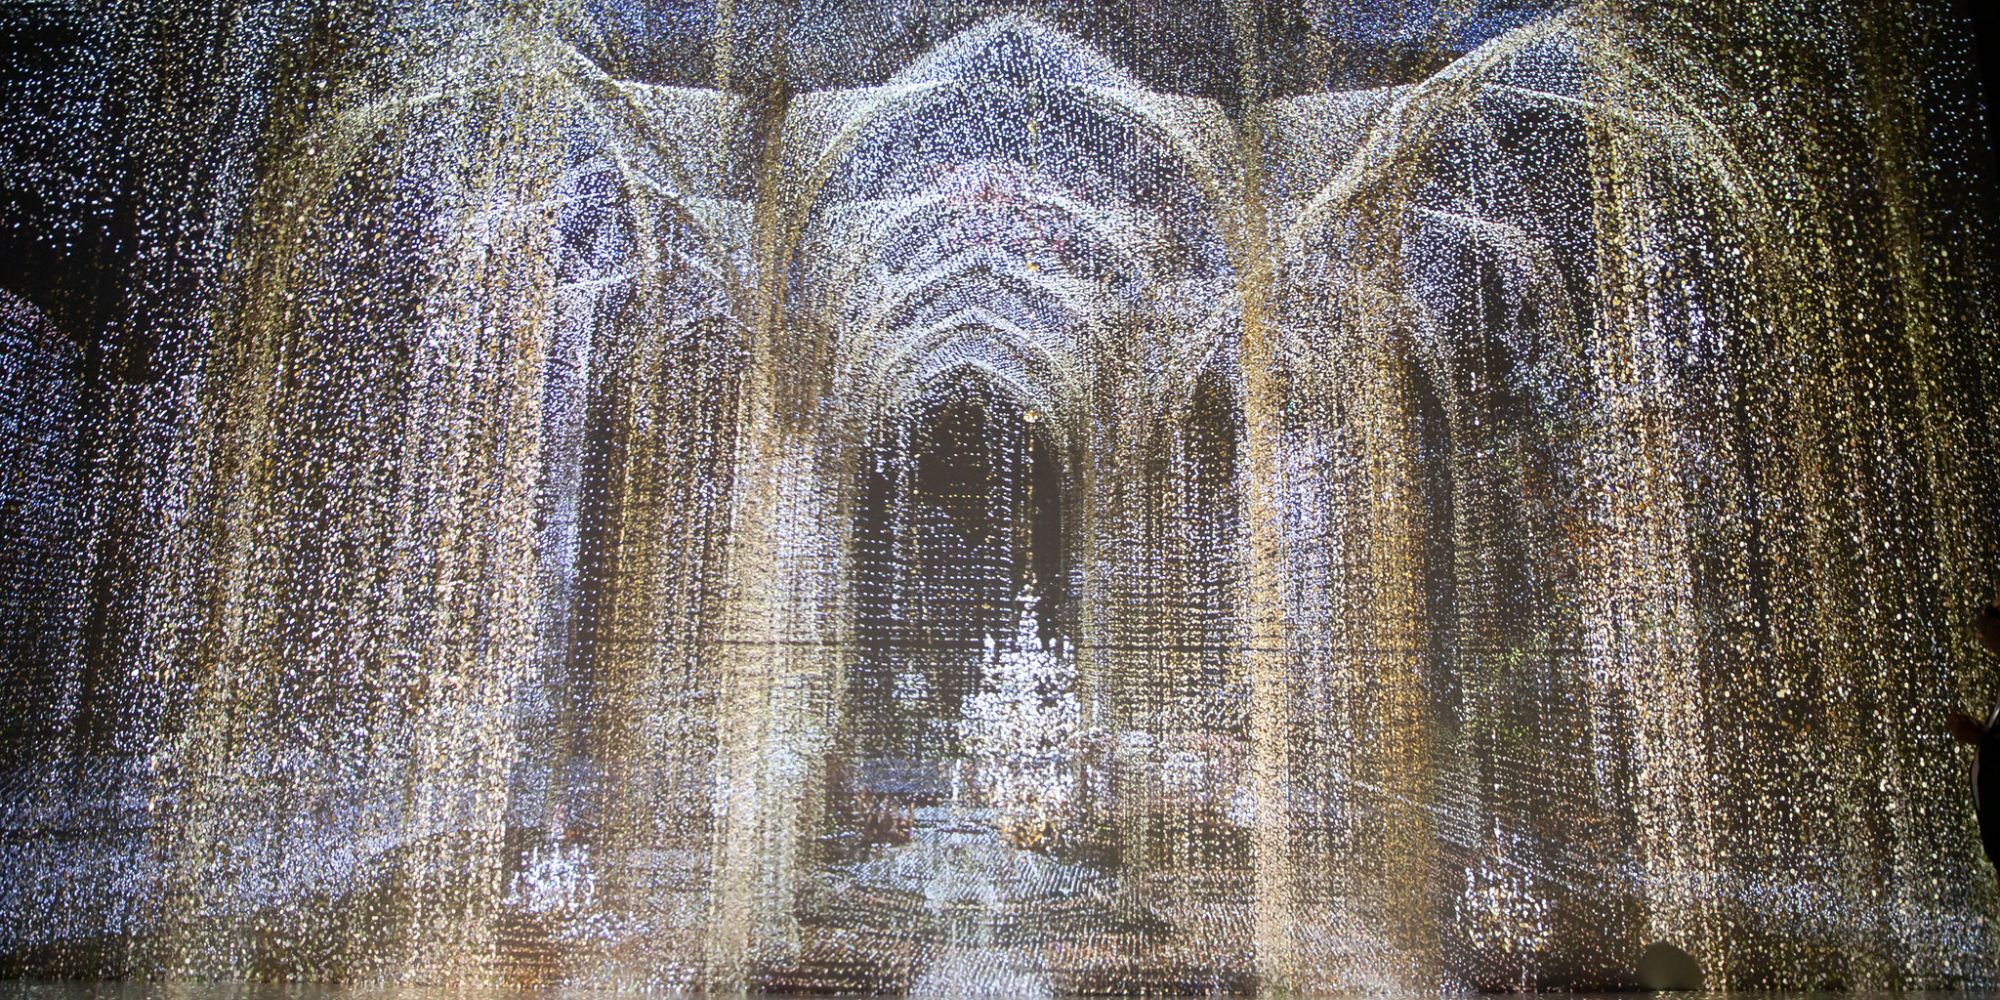 Immersify: The translucent St. Stephen’s Cathedral